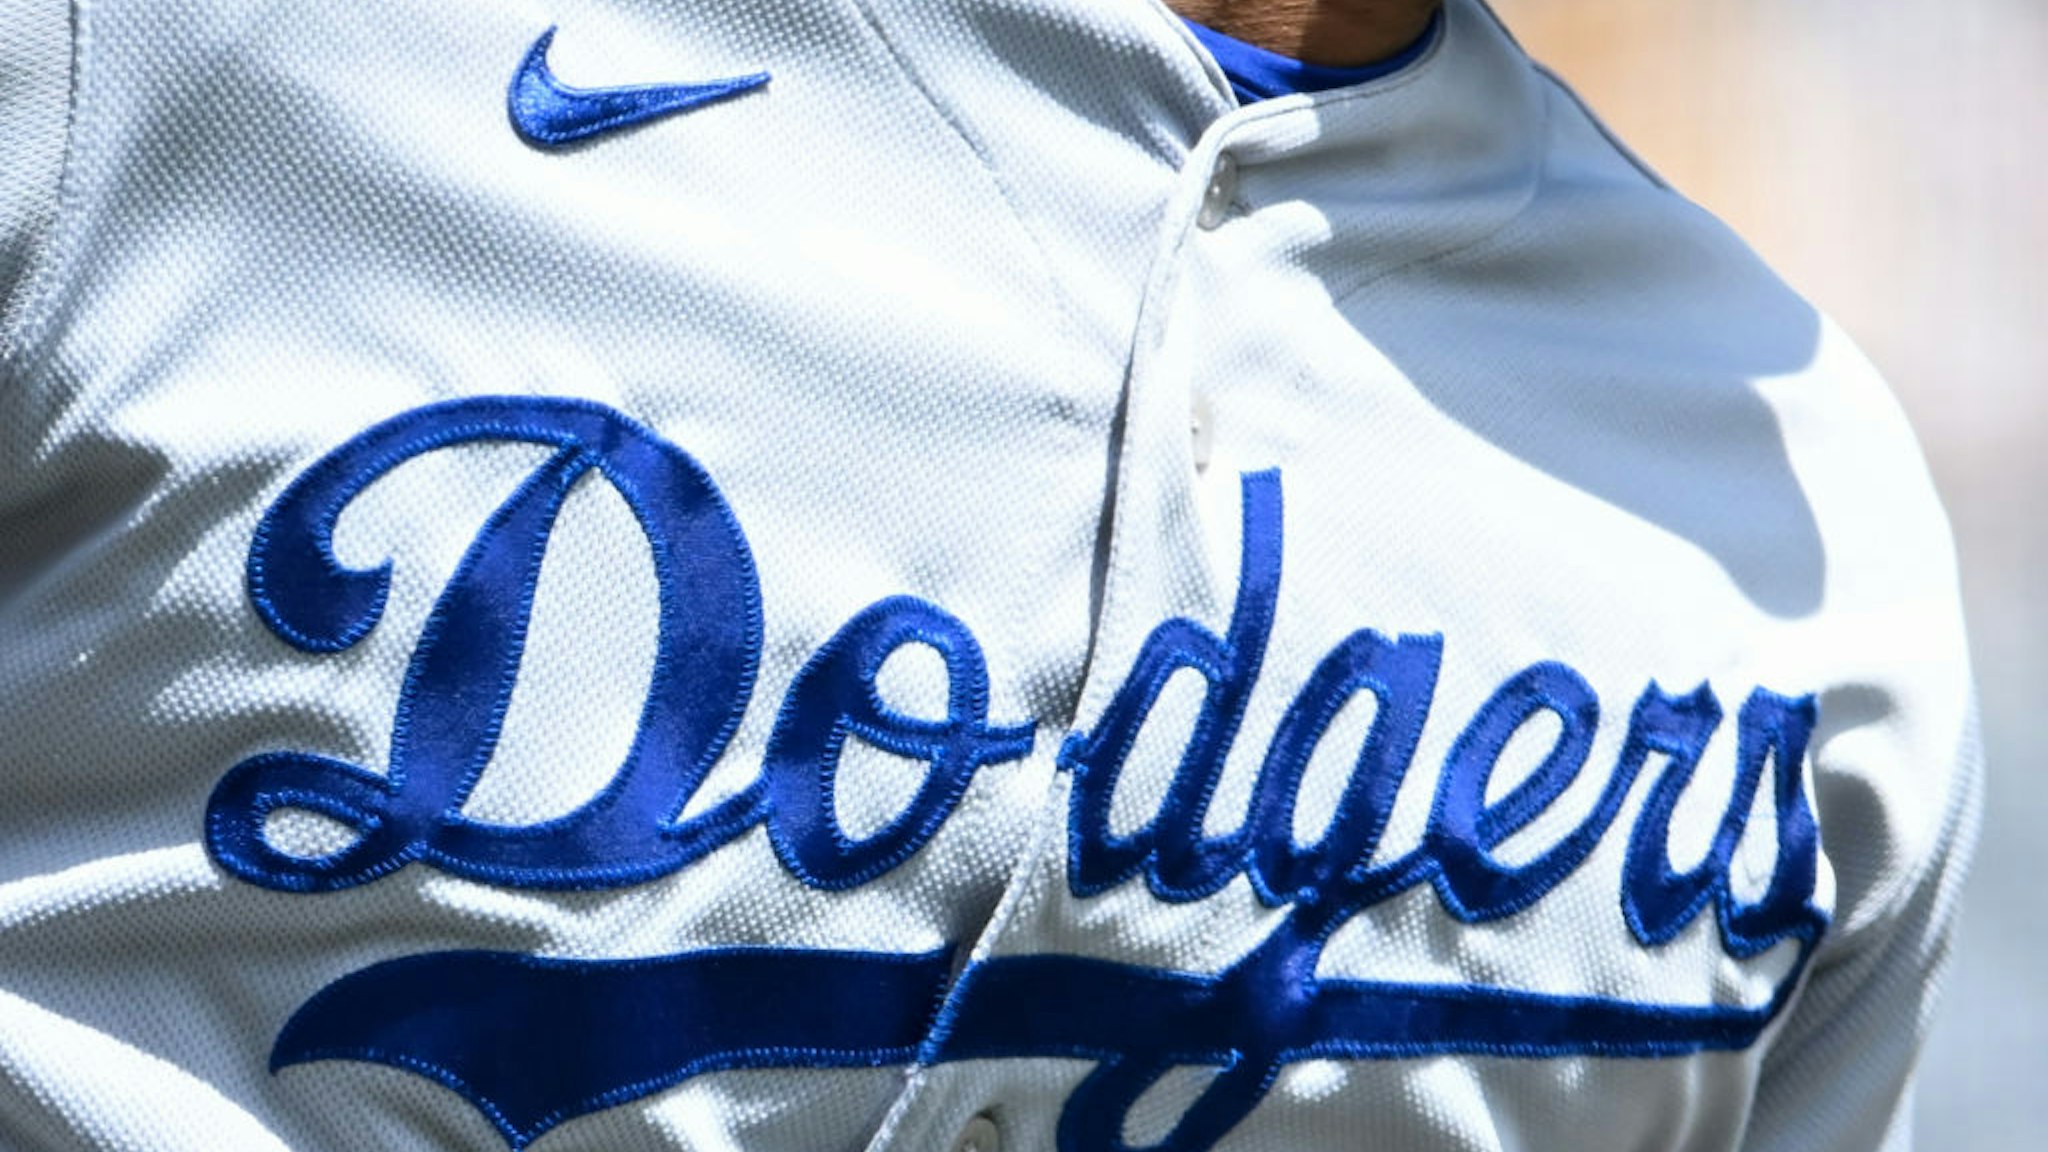 PITTSBURGH, PENNSYLVANIA - APRIL 27, 2023: A closeup view of the Los Angeles Dodgers logo on the jersey worn by Jason Heyward during the first inning against the Pittsburgh Pirates at PNC Park on April 27, 2023 in Pittsburgh, Pennsylvania. (Photo by Nick Cammett/Diamond Images via Getty Images)